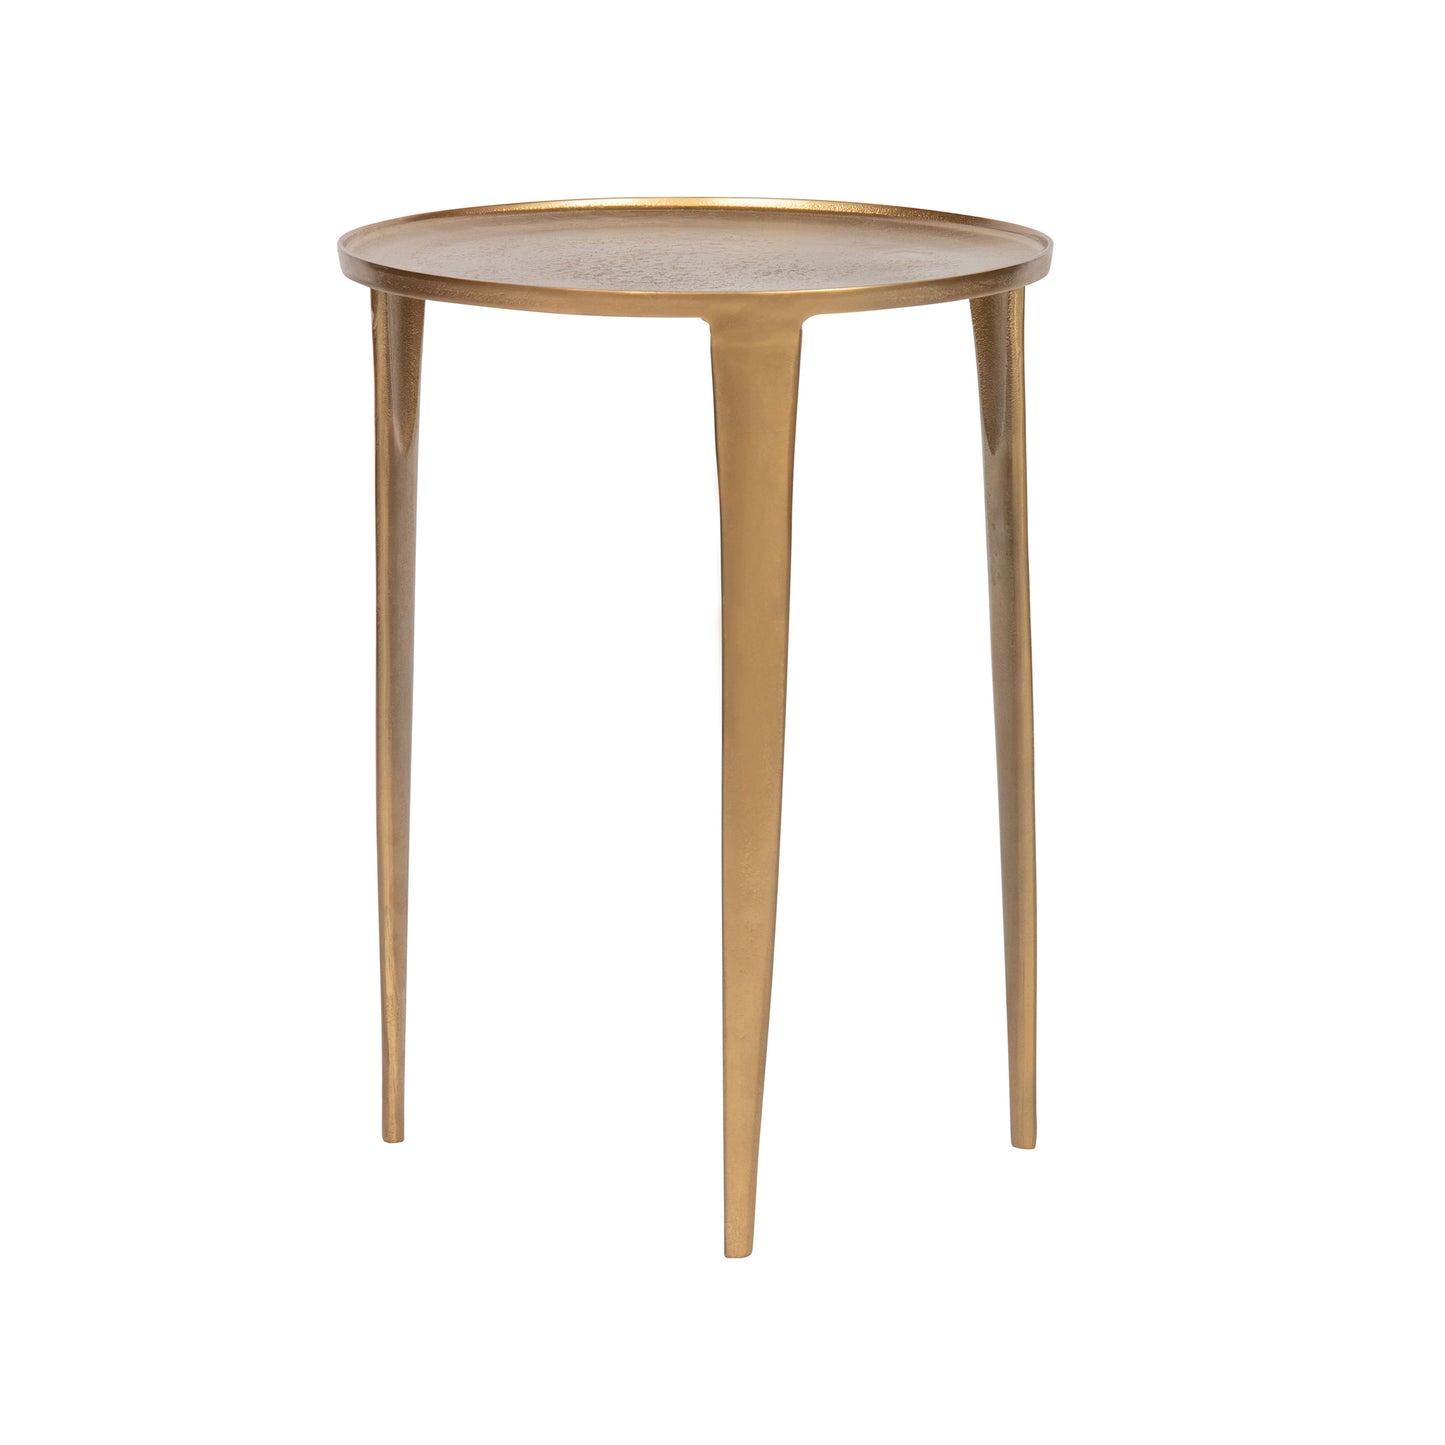 Set of 2 - Medaillon side table